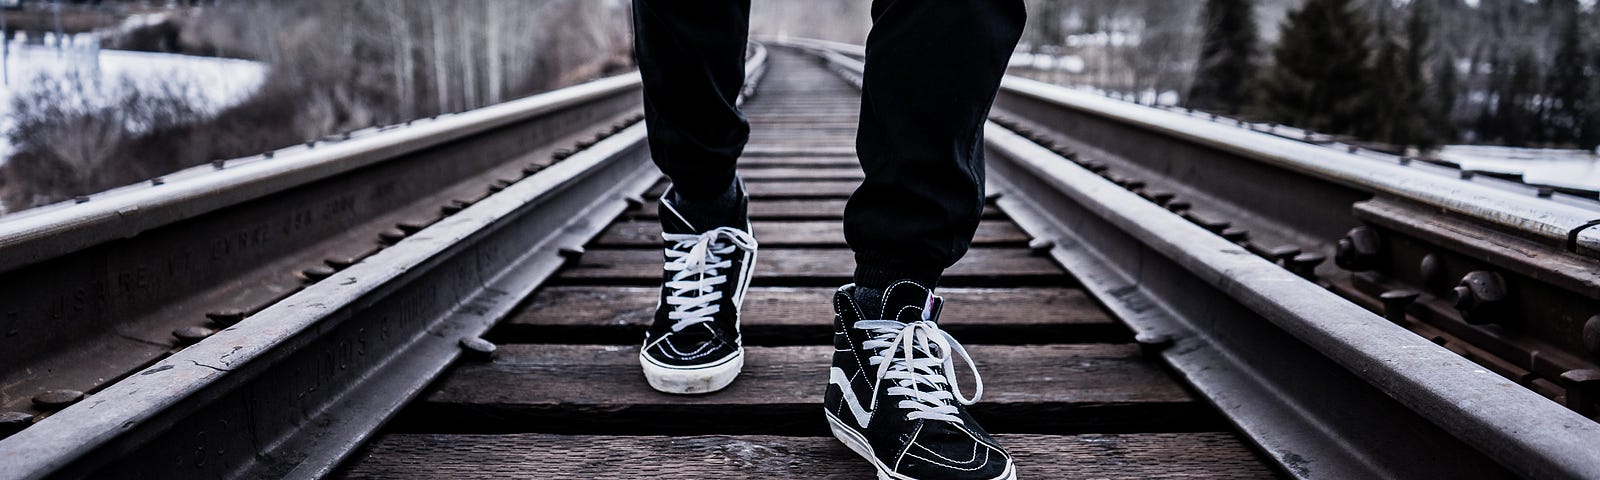 A teenager’s legs and tennis shoes as they cross a railroad bridge during the winter